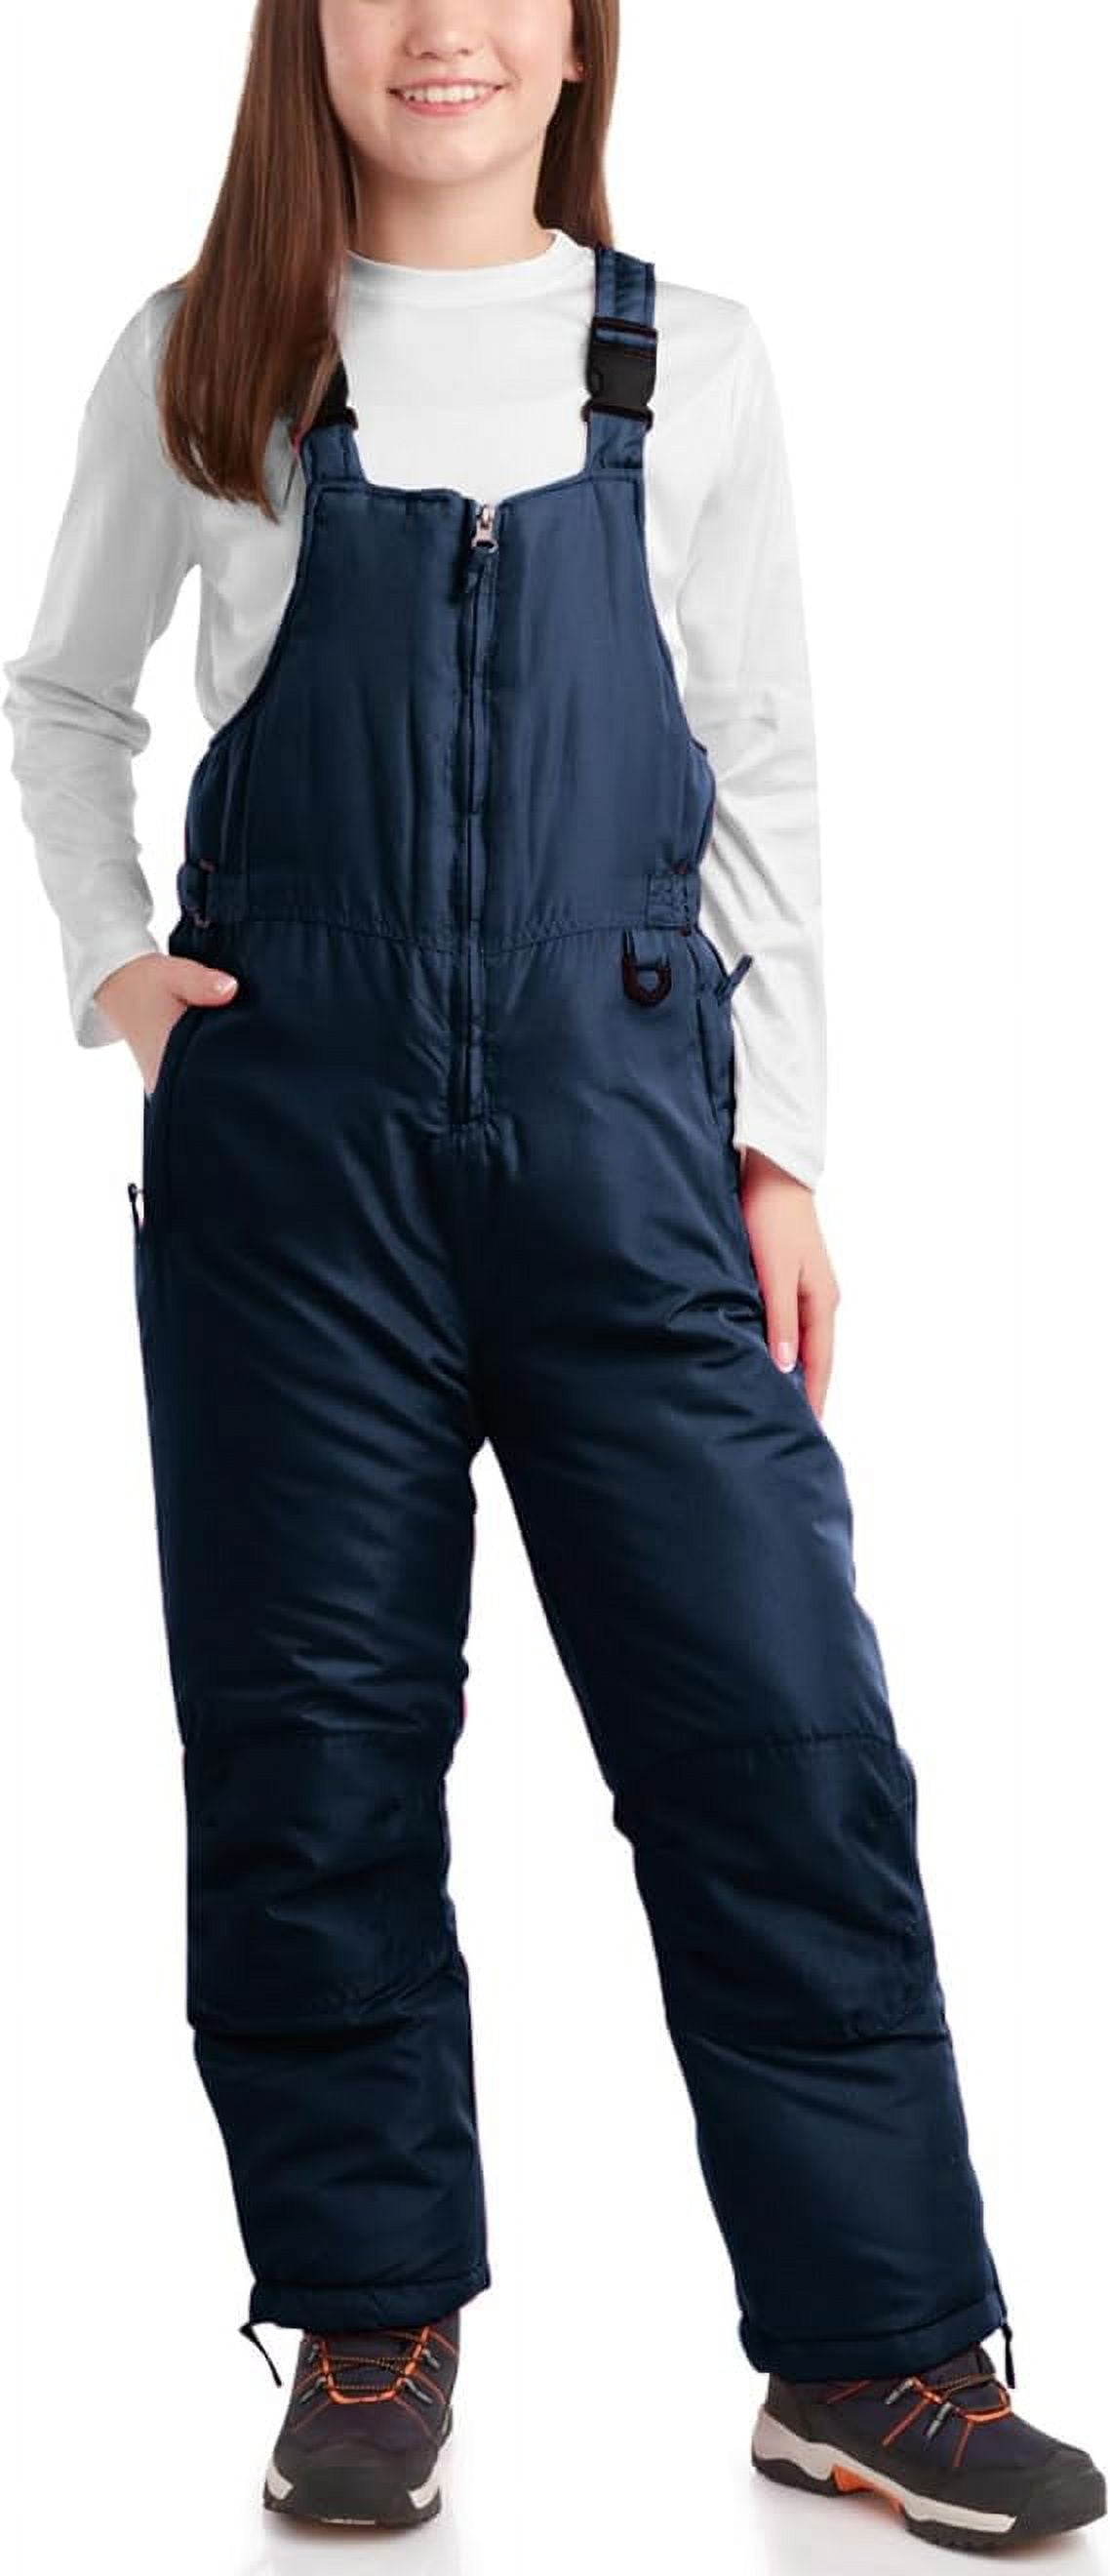 SWMSTUPF Kids Boys Snow Pants 2-8 Years Old Thick Winter Warm